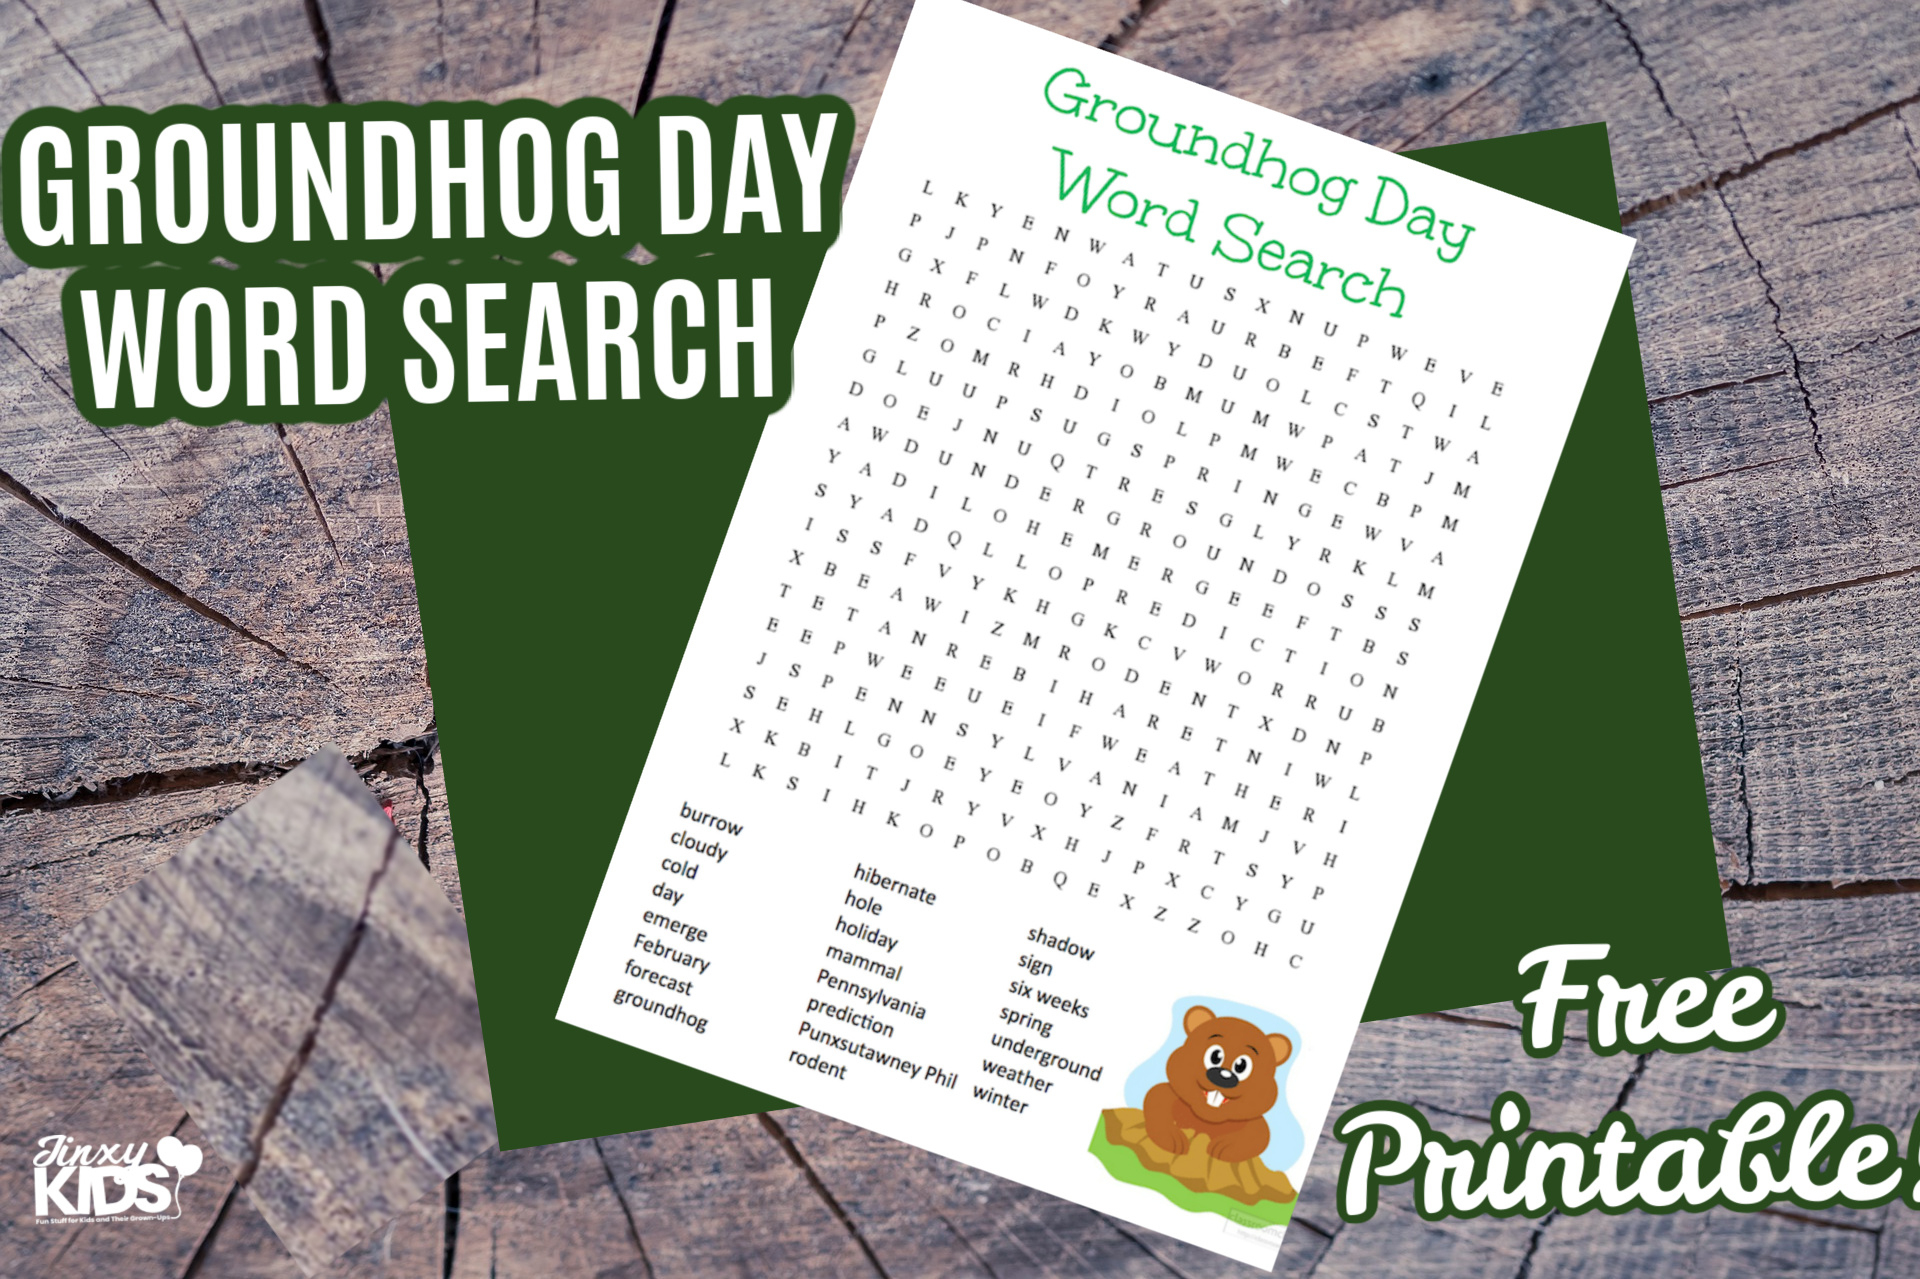 Free Printable Groundhog Day Word Search Puzzle - Jinxy Kids